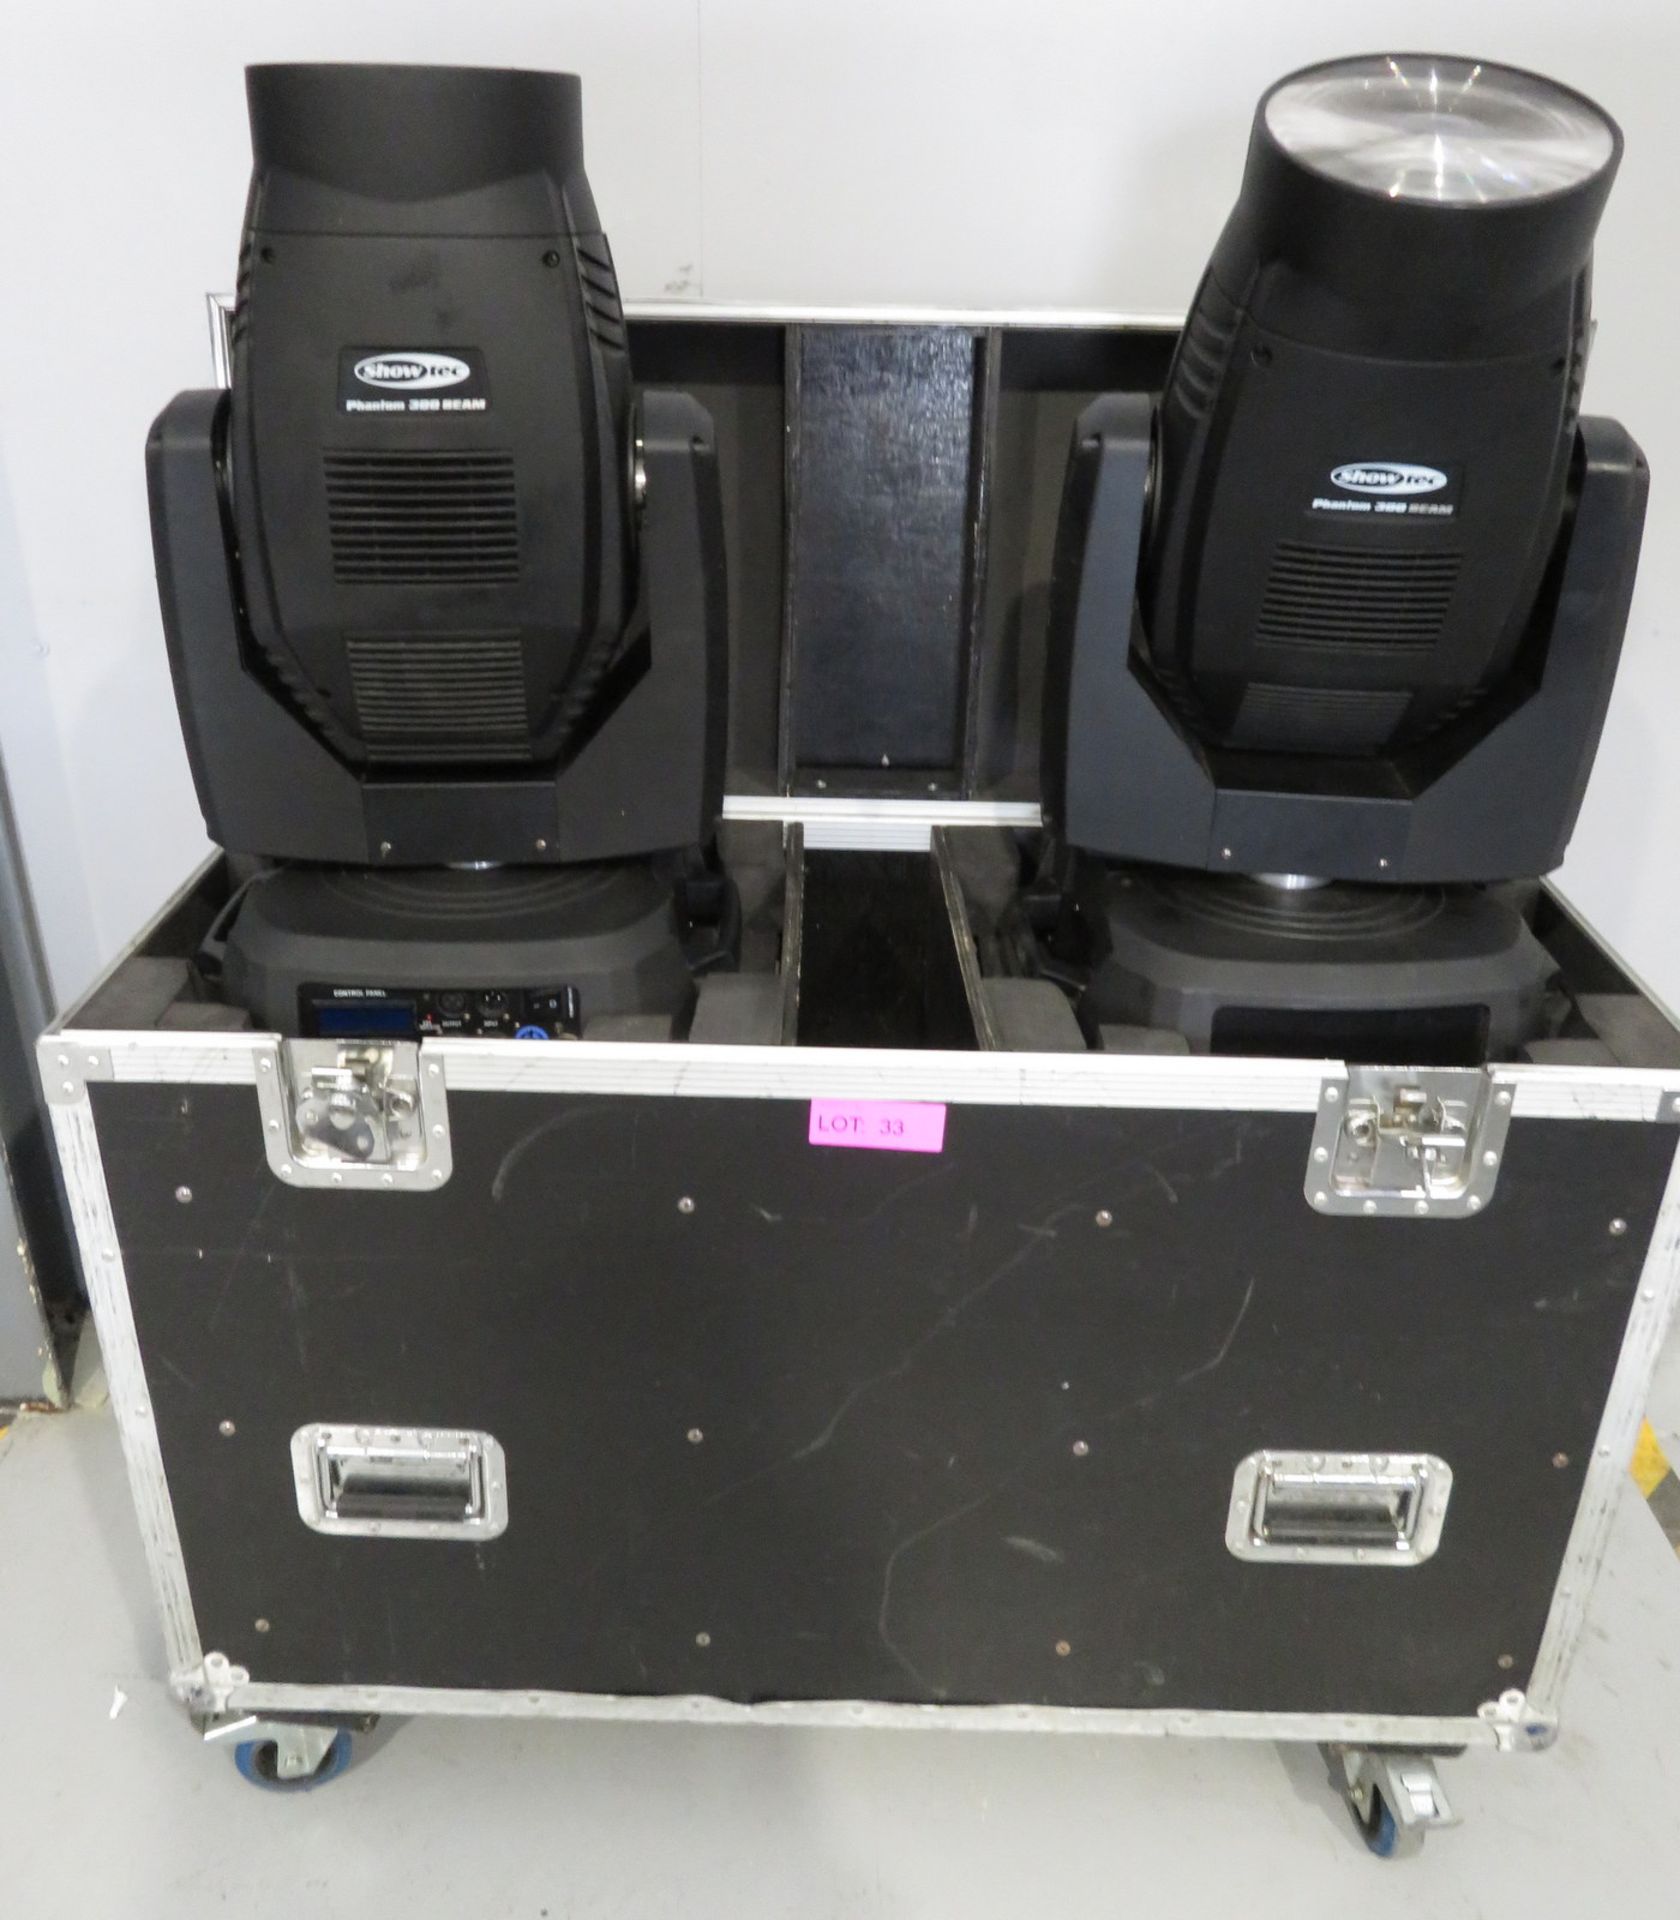 Pair of Showtec Phantom 300 Beams in flightcase. Includes hanging clamps and safety bonds.